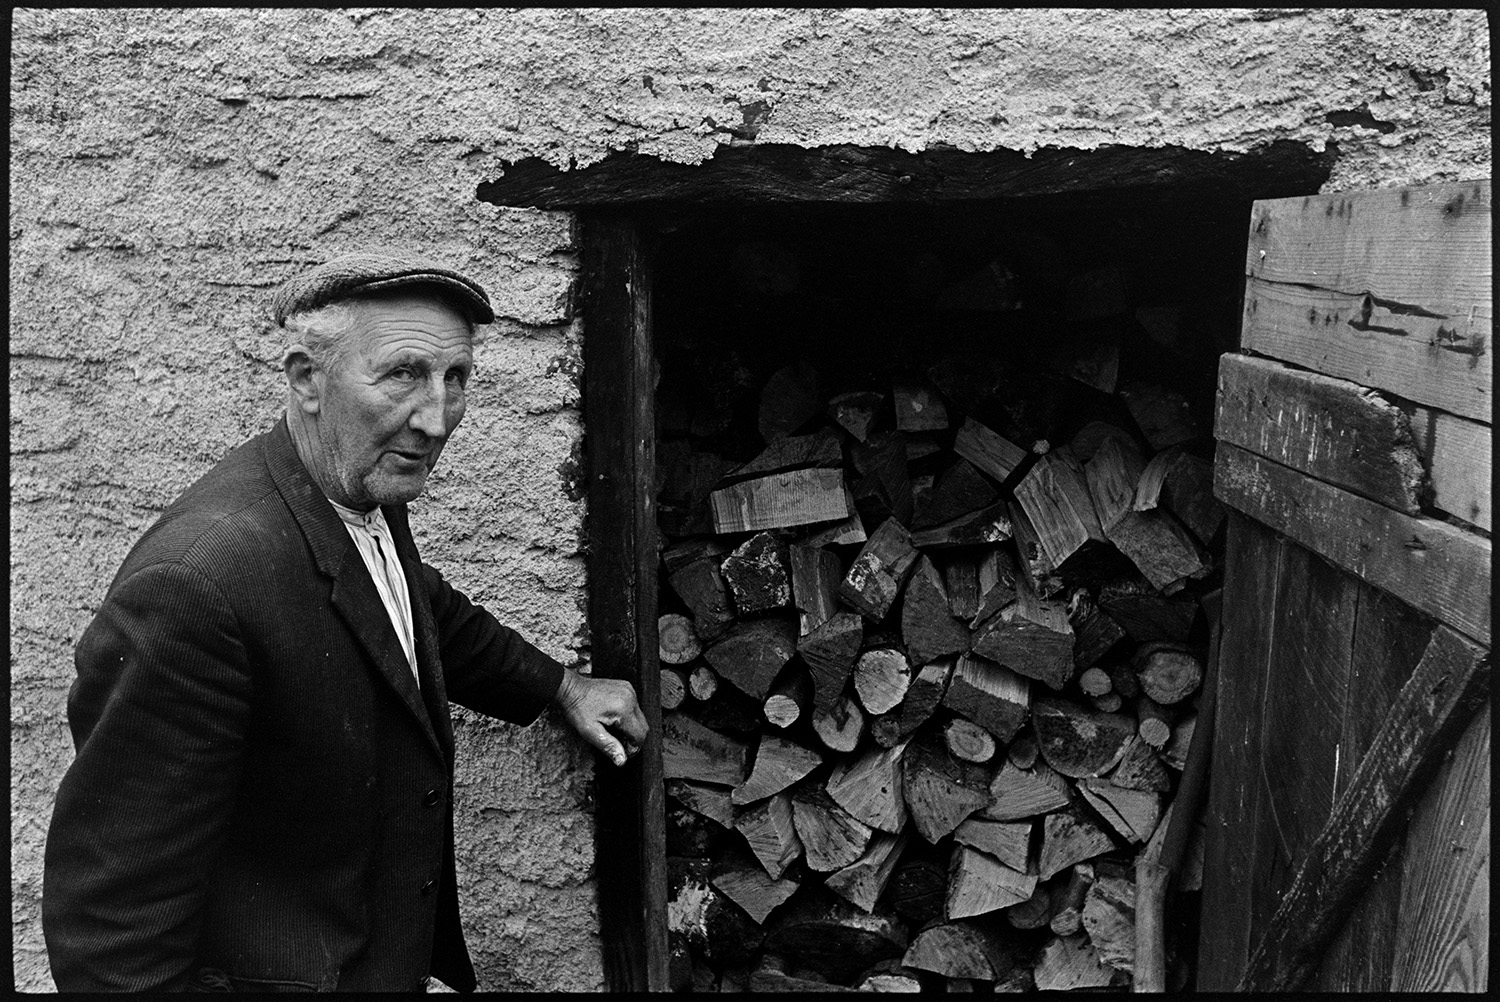 Doctor on rounds talking to man patient outside his house.
[Edward Cotsford stood by a shed with a  pile of logs at Charles Bottom, South Molton.]